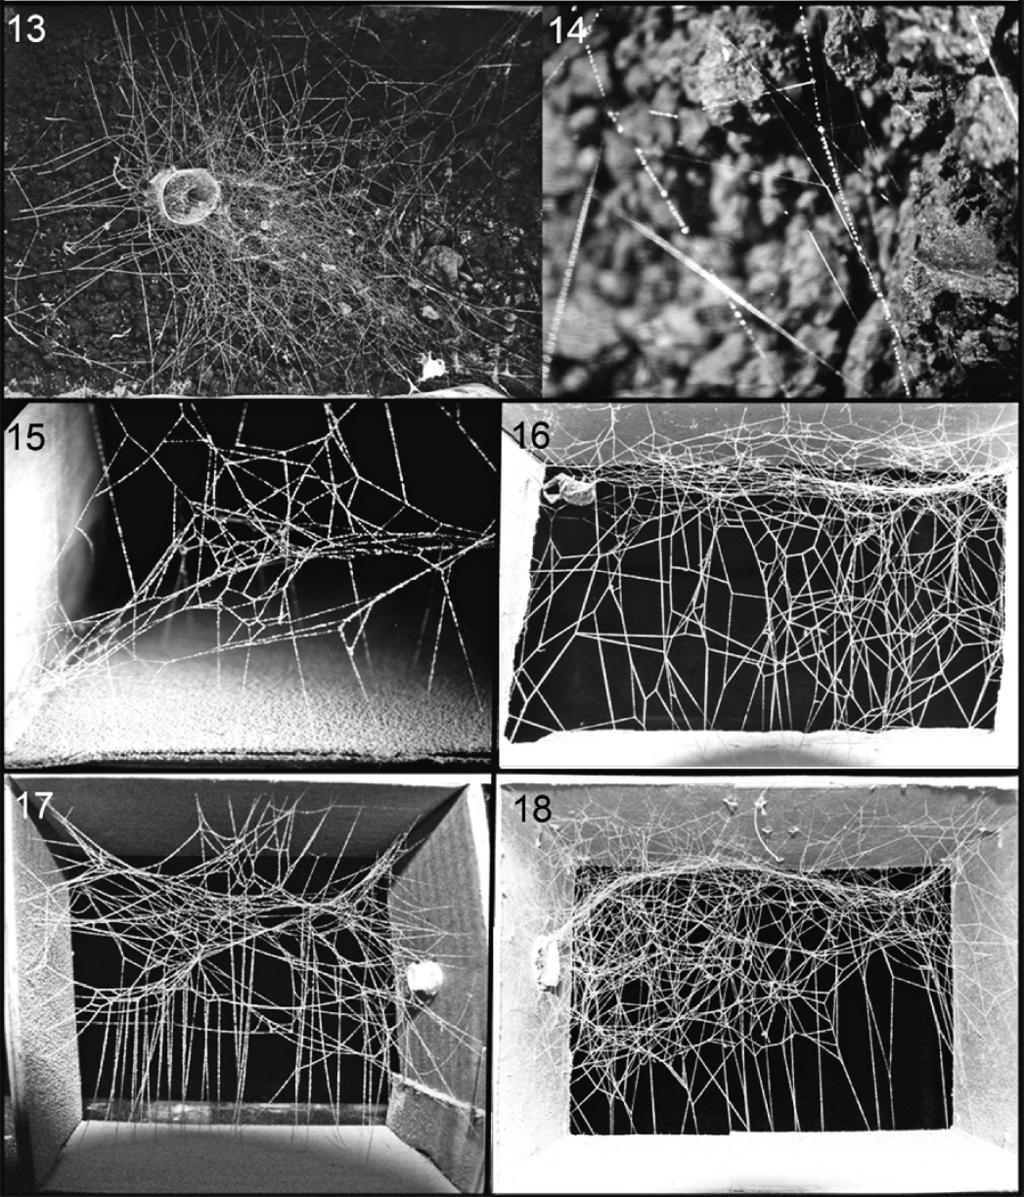 BARRANTES & EBERHARD WEB ONTOGENY CHANGES IN THERIDIIDS 491 Figures 13 18. Webs of Steatoda species. 13. Web of mature female Steatoda nr. hespera built in conditions mimicking those in the field. 14.